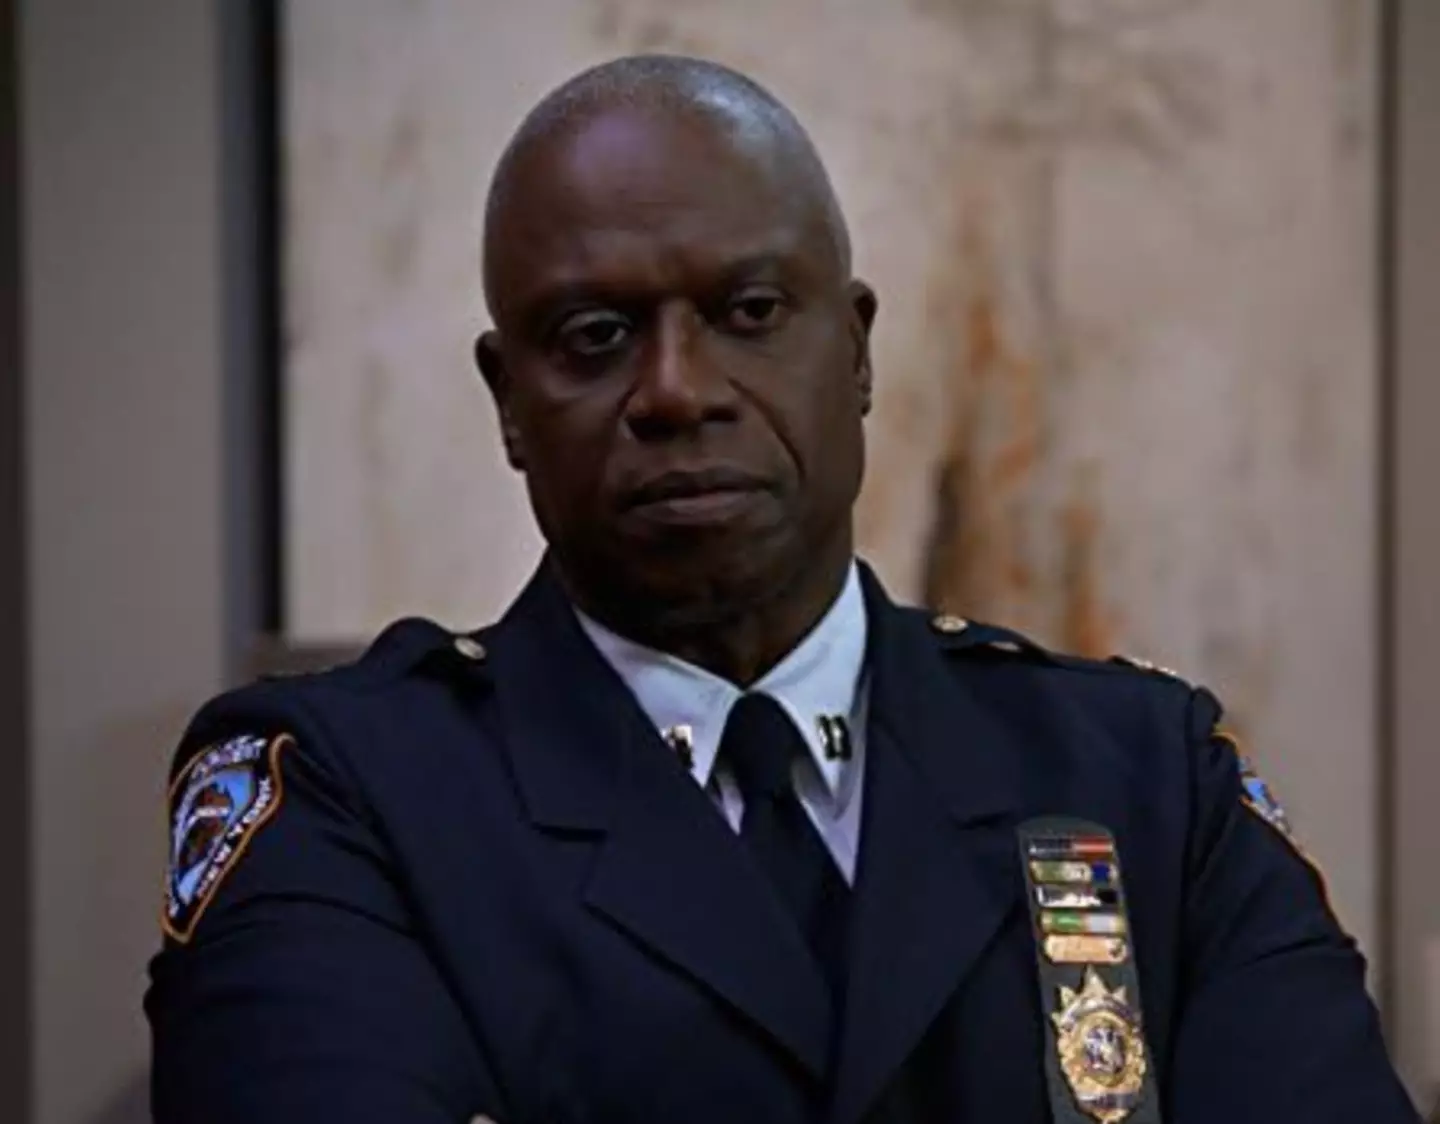 Andre Braugher played Captain Holt perfectly.